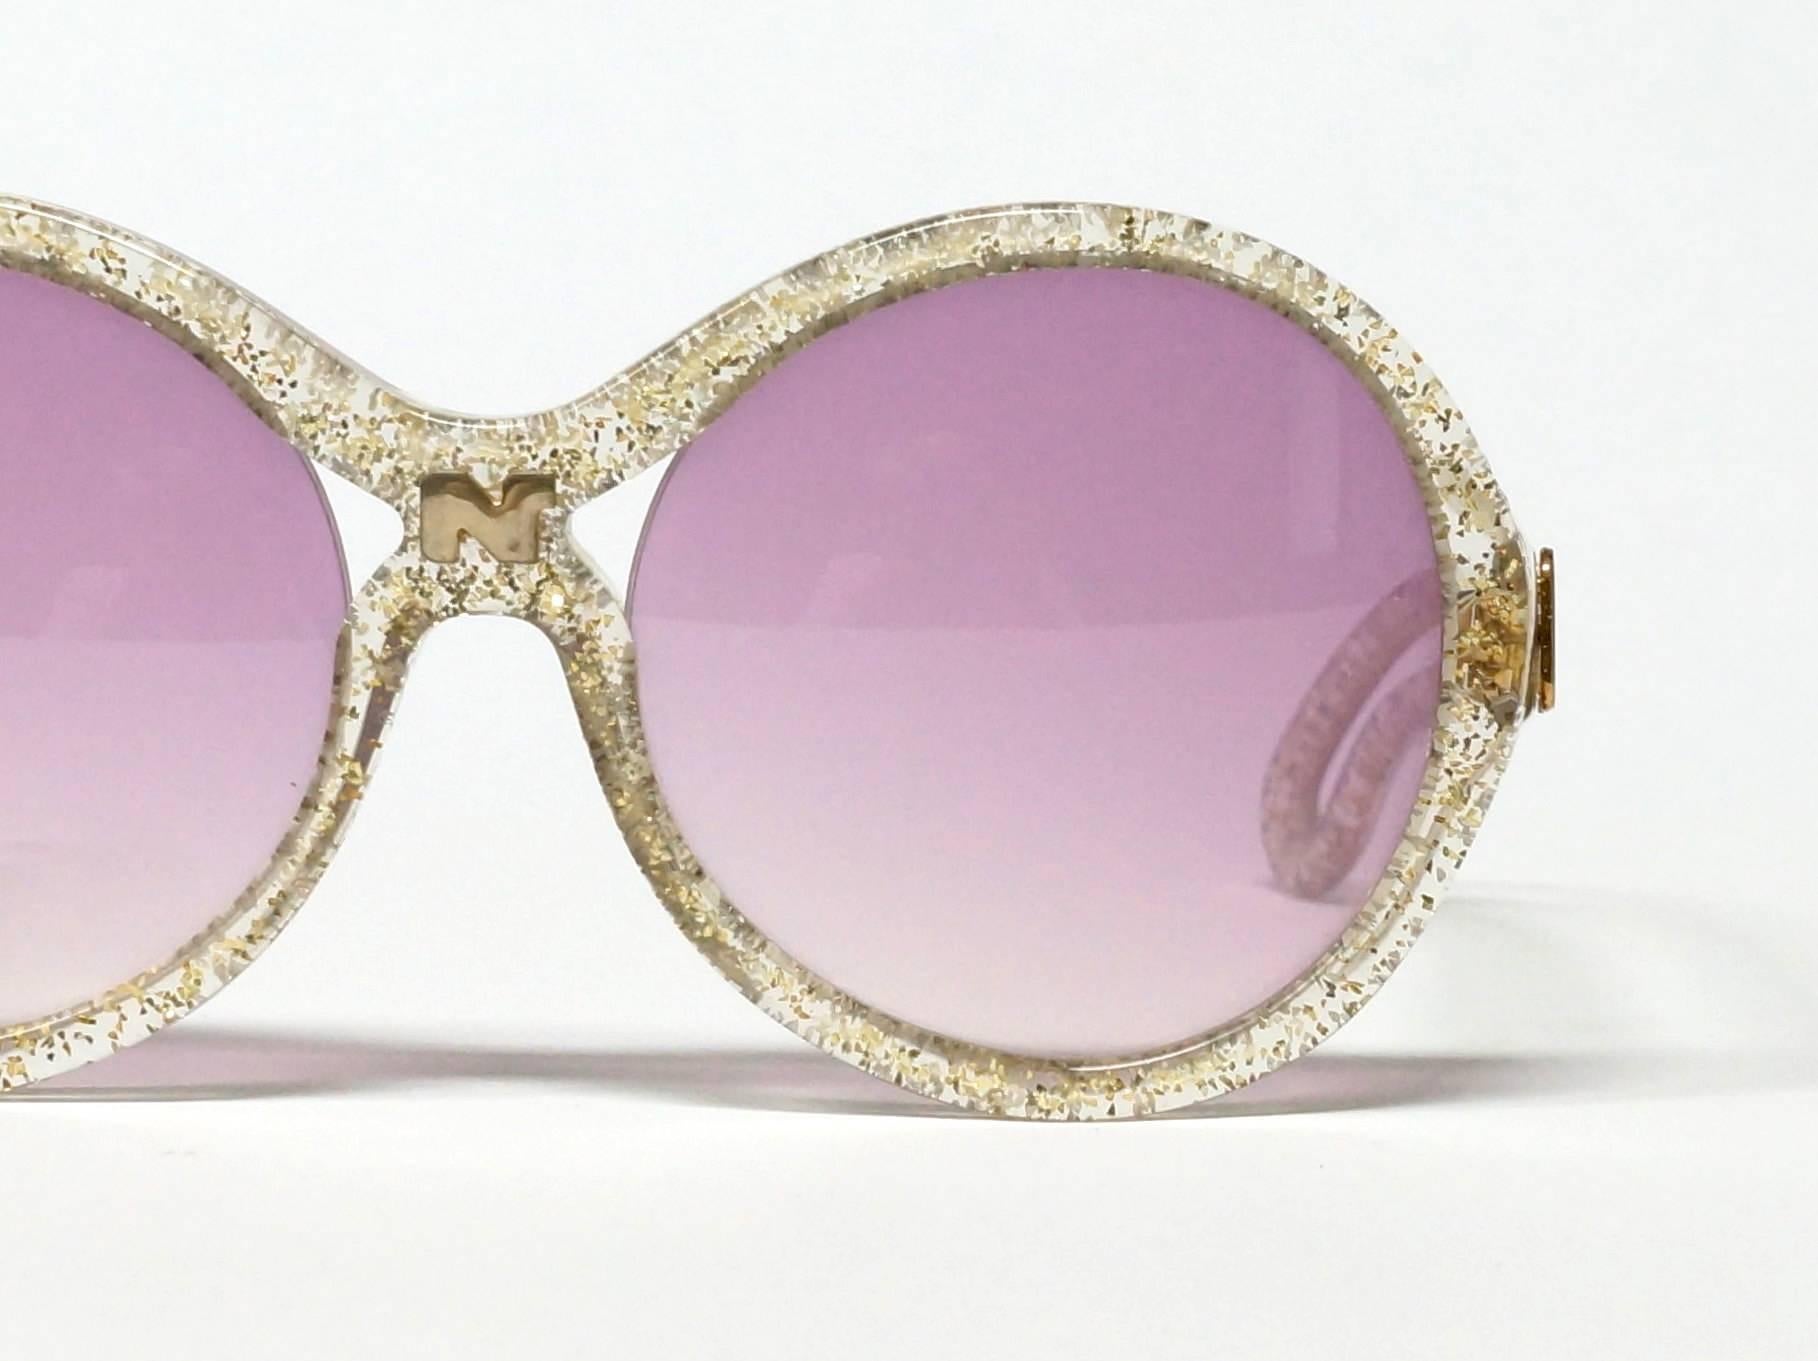 Amazing vintage 70s Nina Ricci sunglasses. Gold and Glitter translucent oversized frame with cutout details and logo at bridge and carved arms arms with golden logos. 

approximate dimensions: 
temple length: 135 mm - 5 5/16